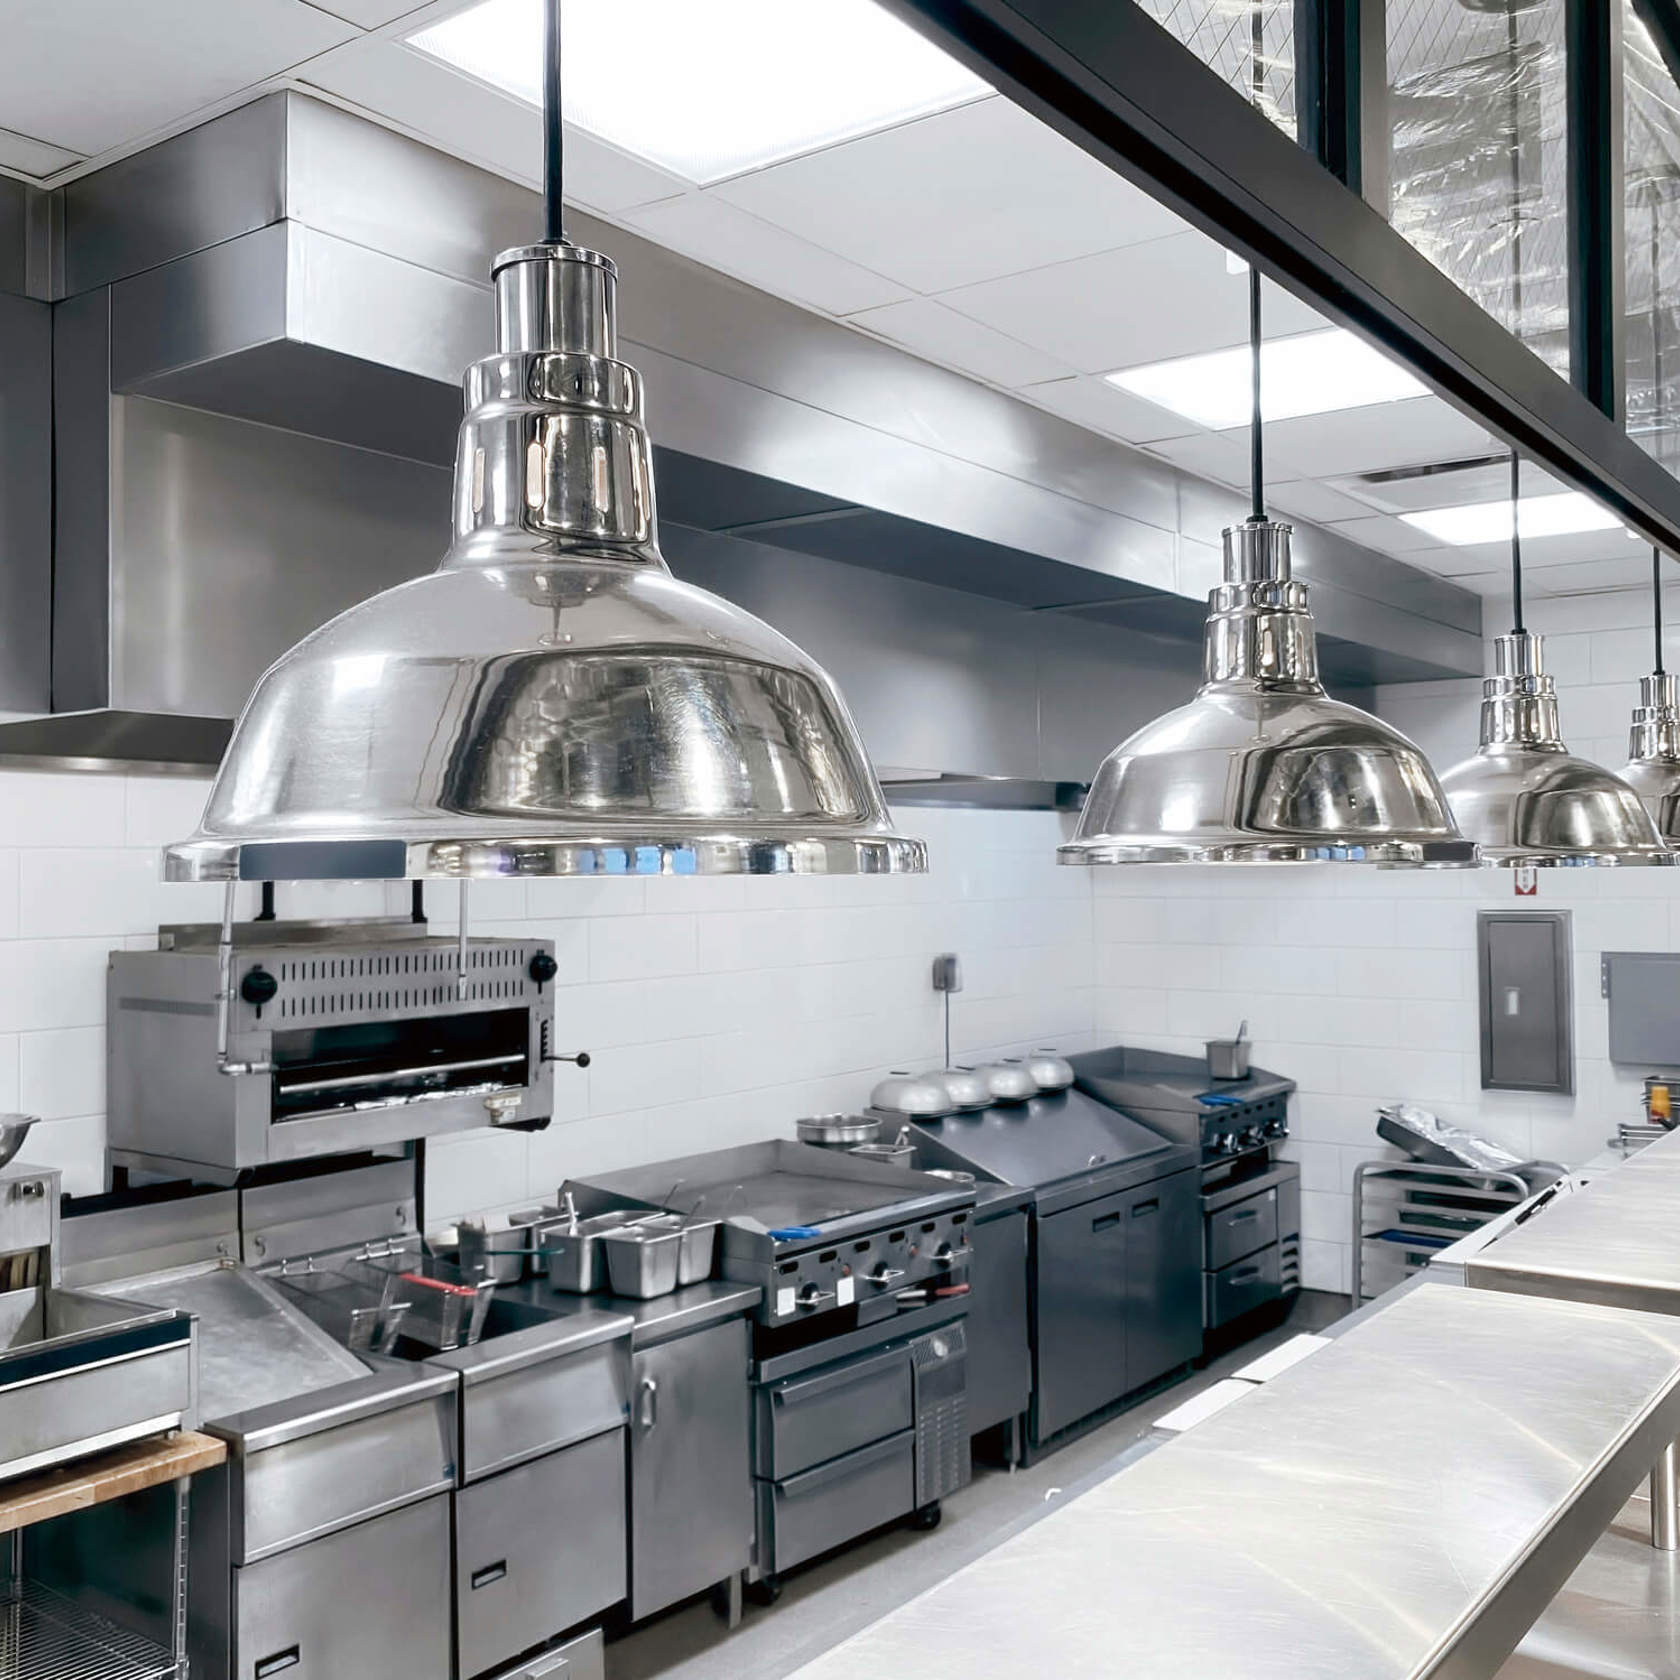 An internal image of a commercial resturant kitchen.